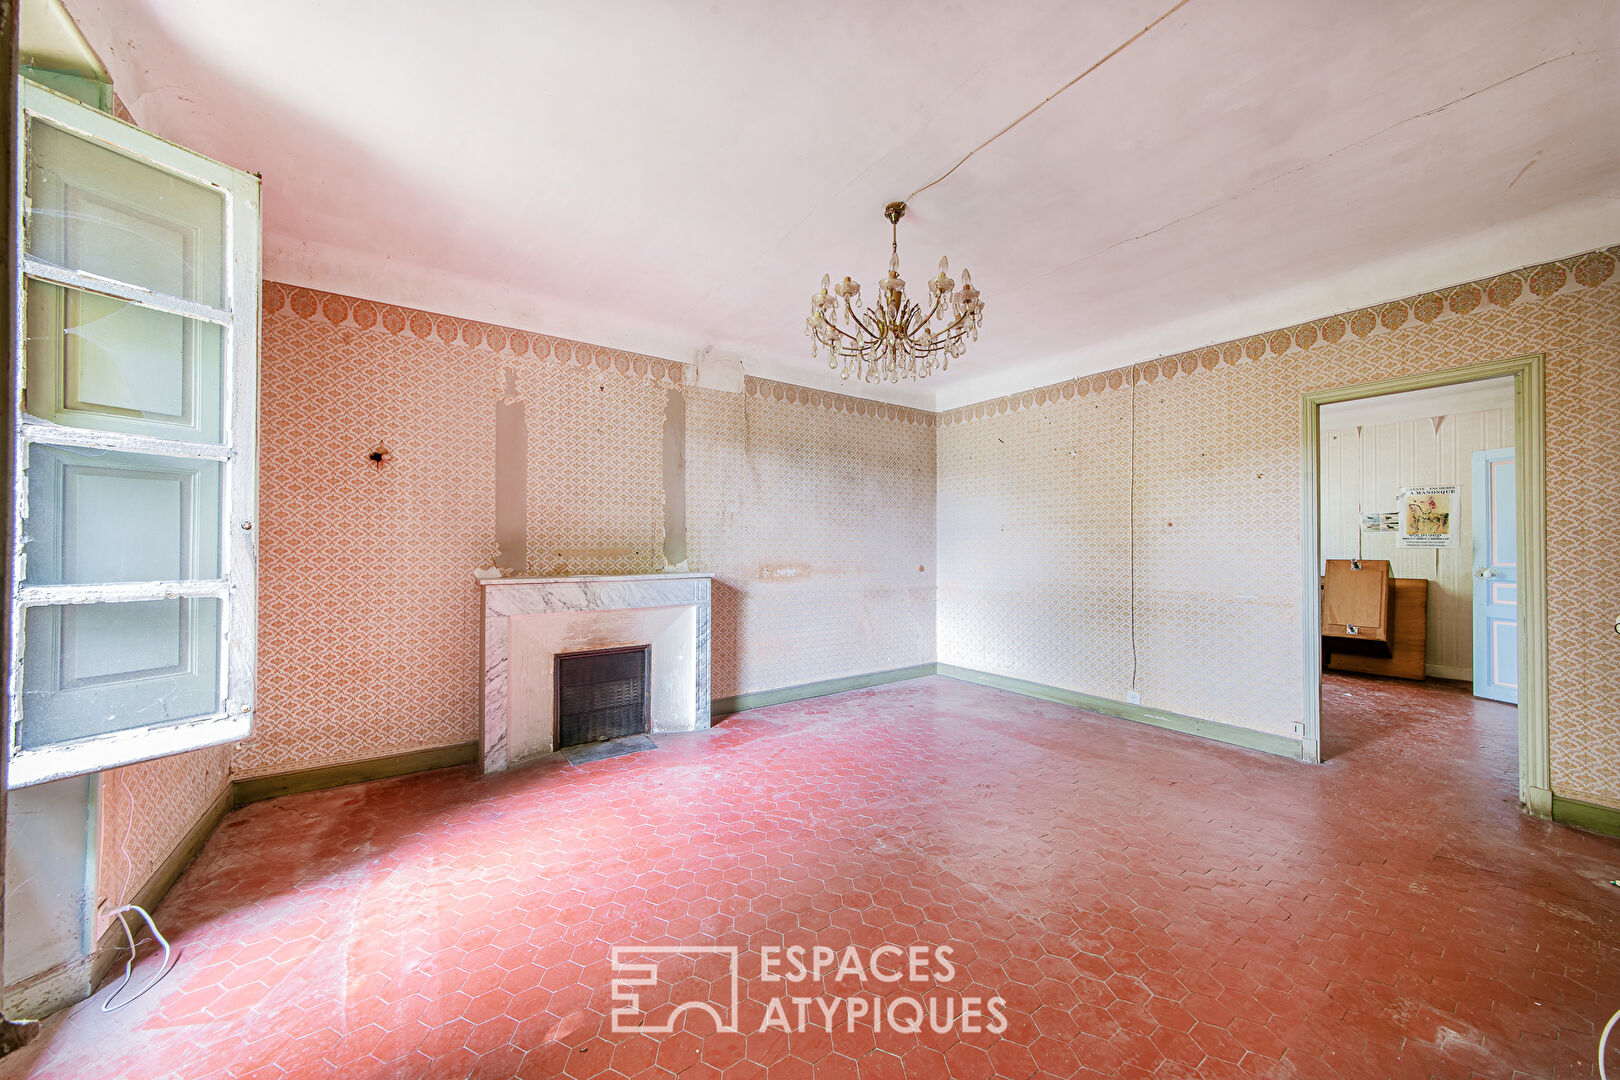 Estate with 19th century buildings to renovate on 2.5 hectares of wooded land